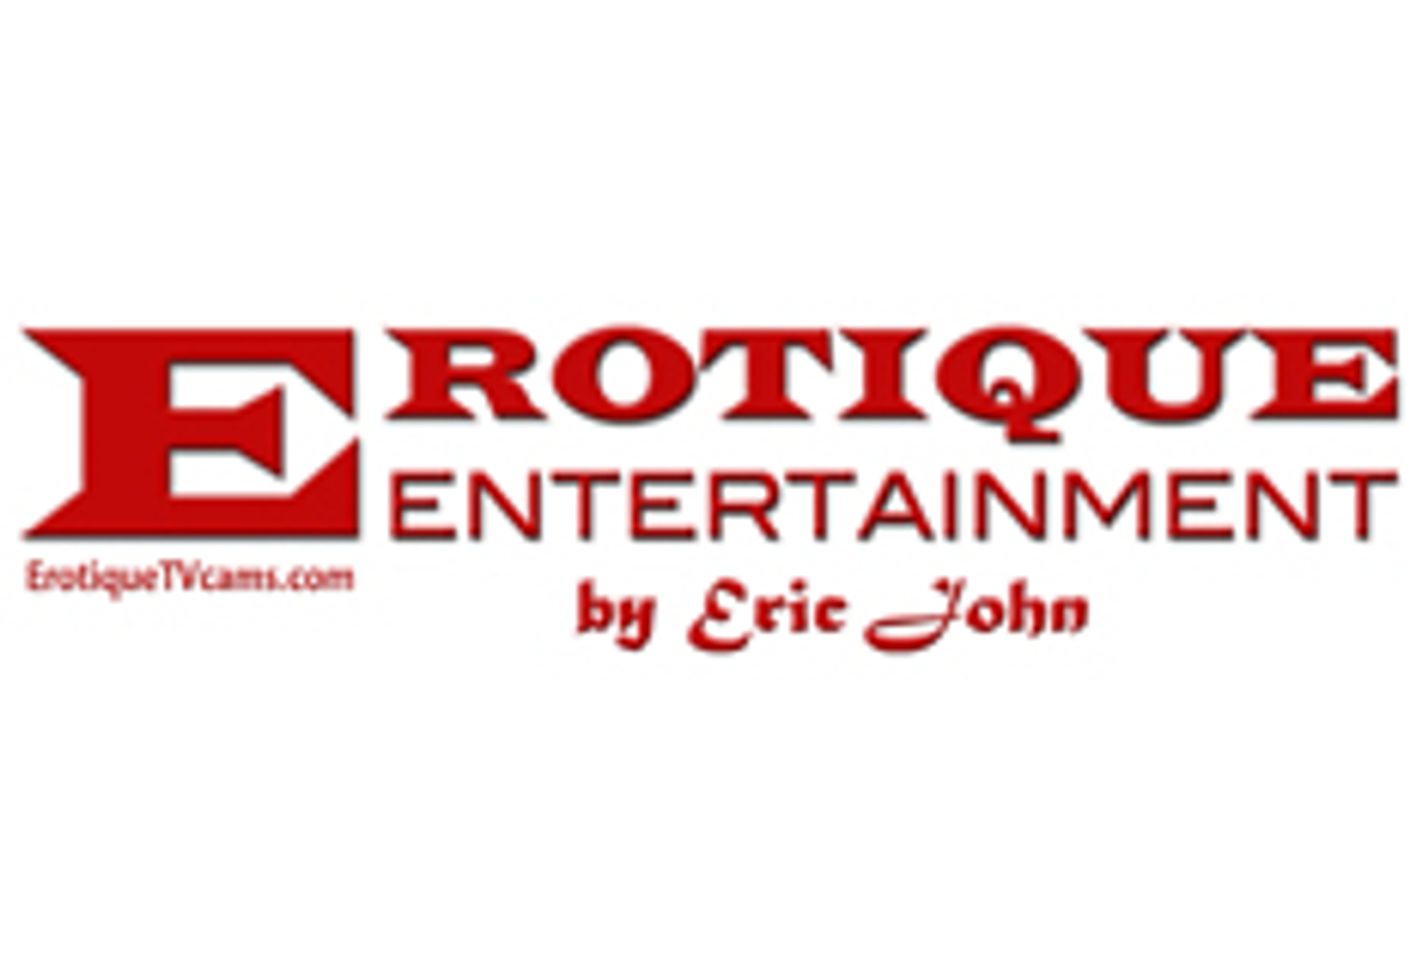 ErotiqueTV Plans Busy Weekend With 6 Shows